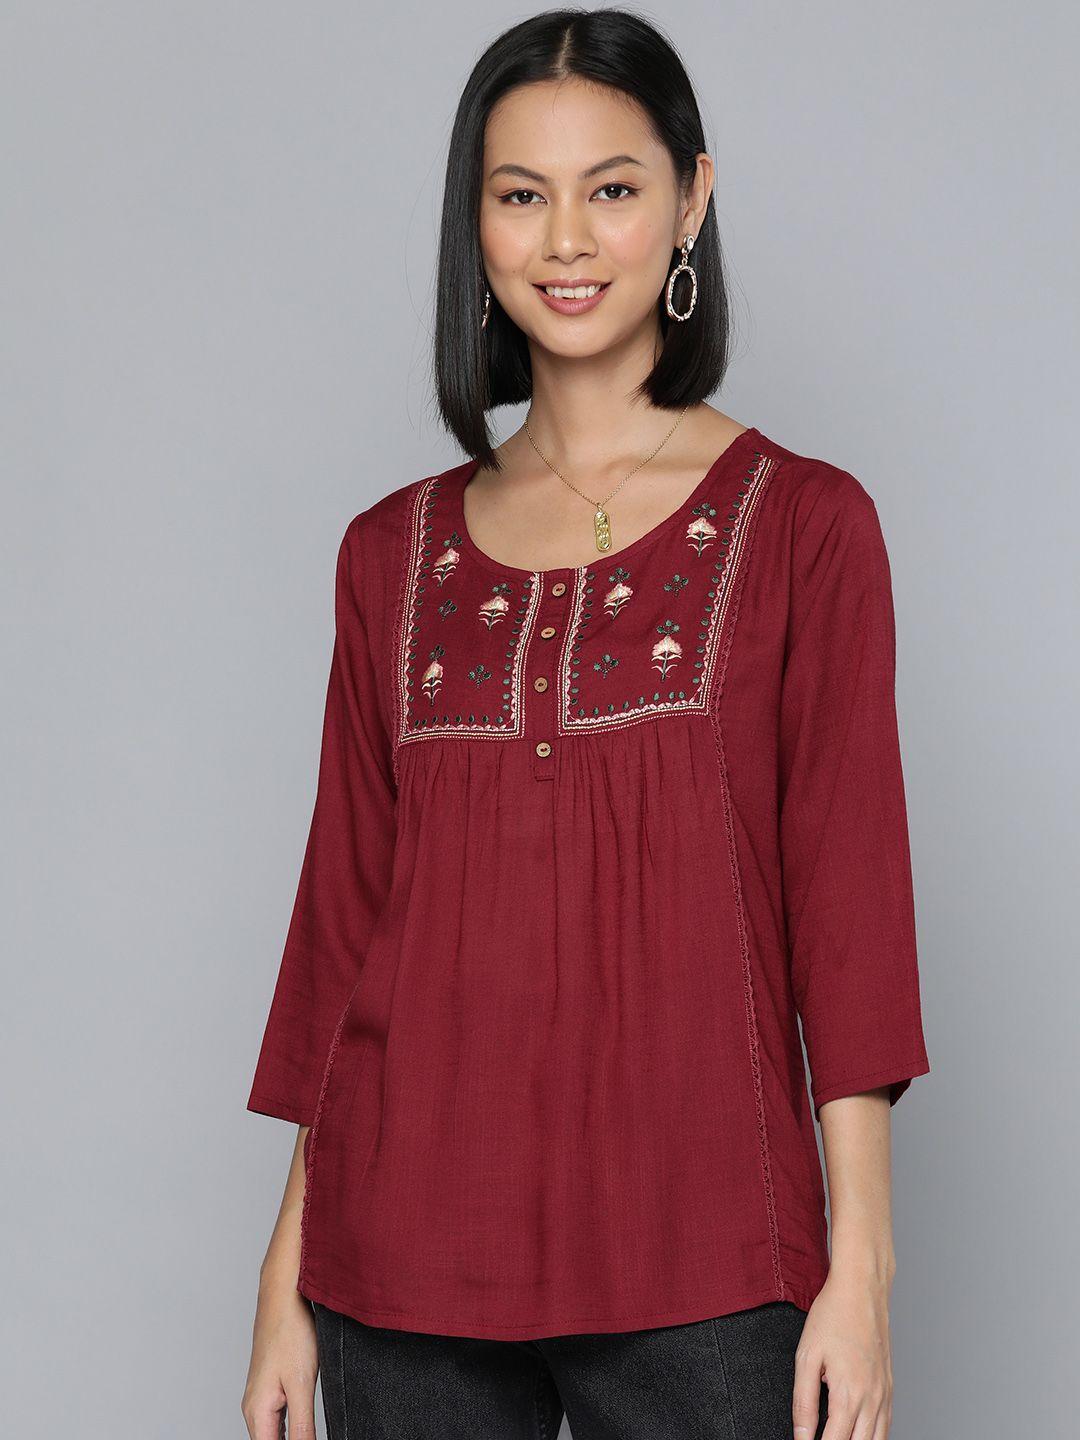 here&now embroidered ethnic top